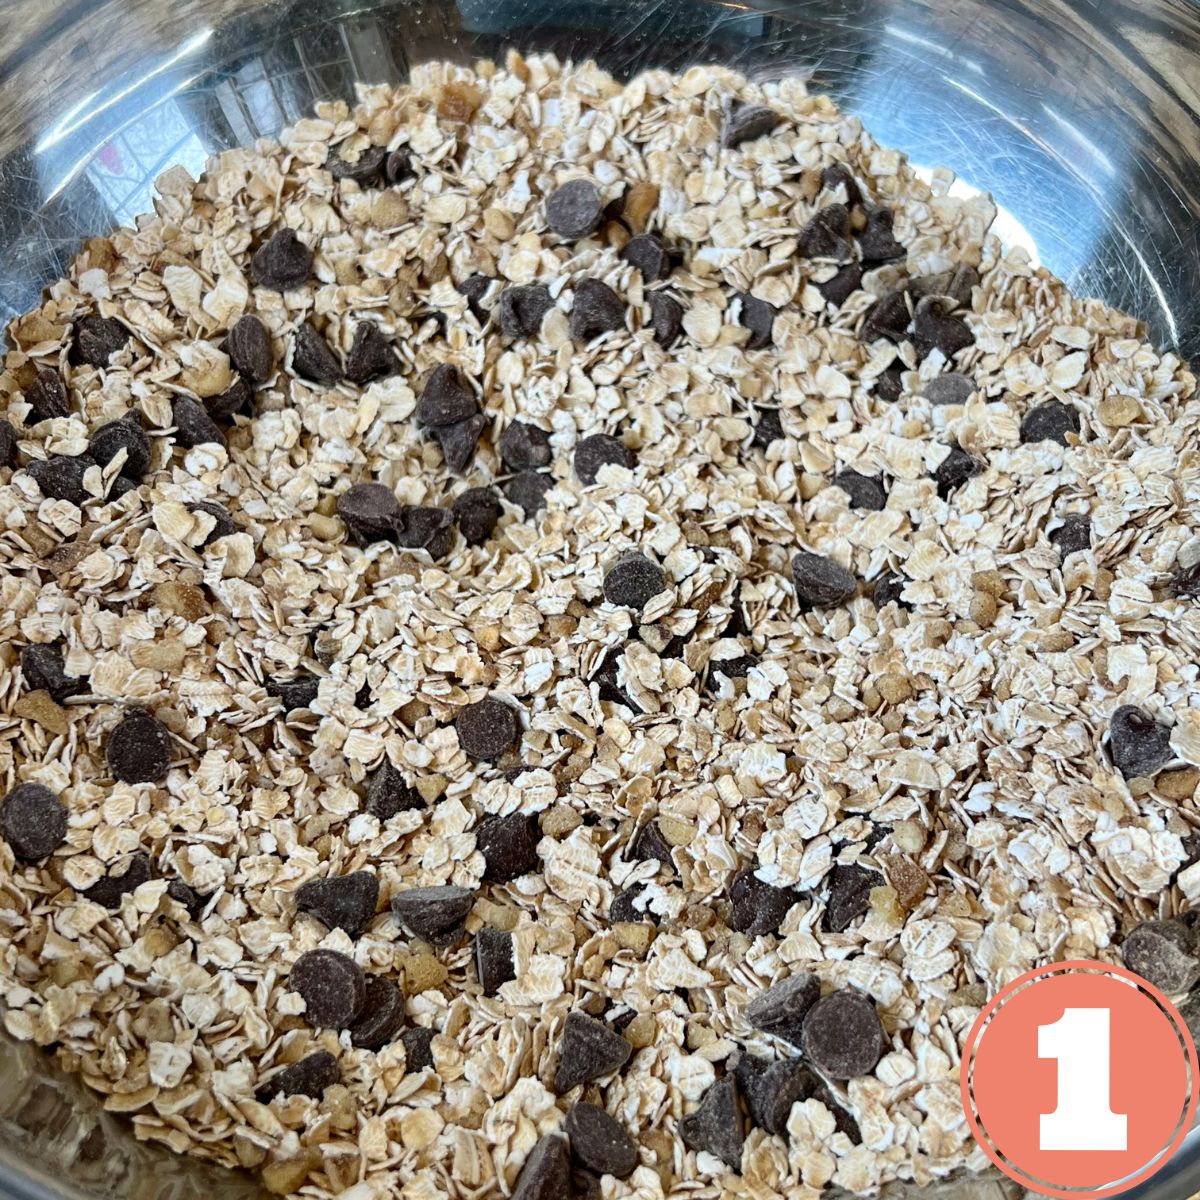 A stainless steel bowl holding baked oatmeal dry ingredients